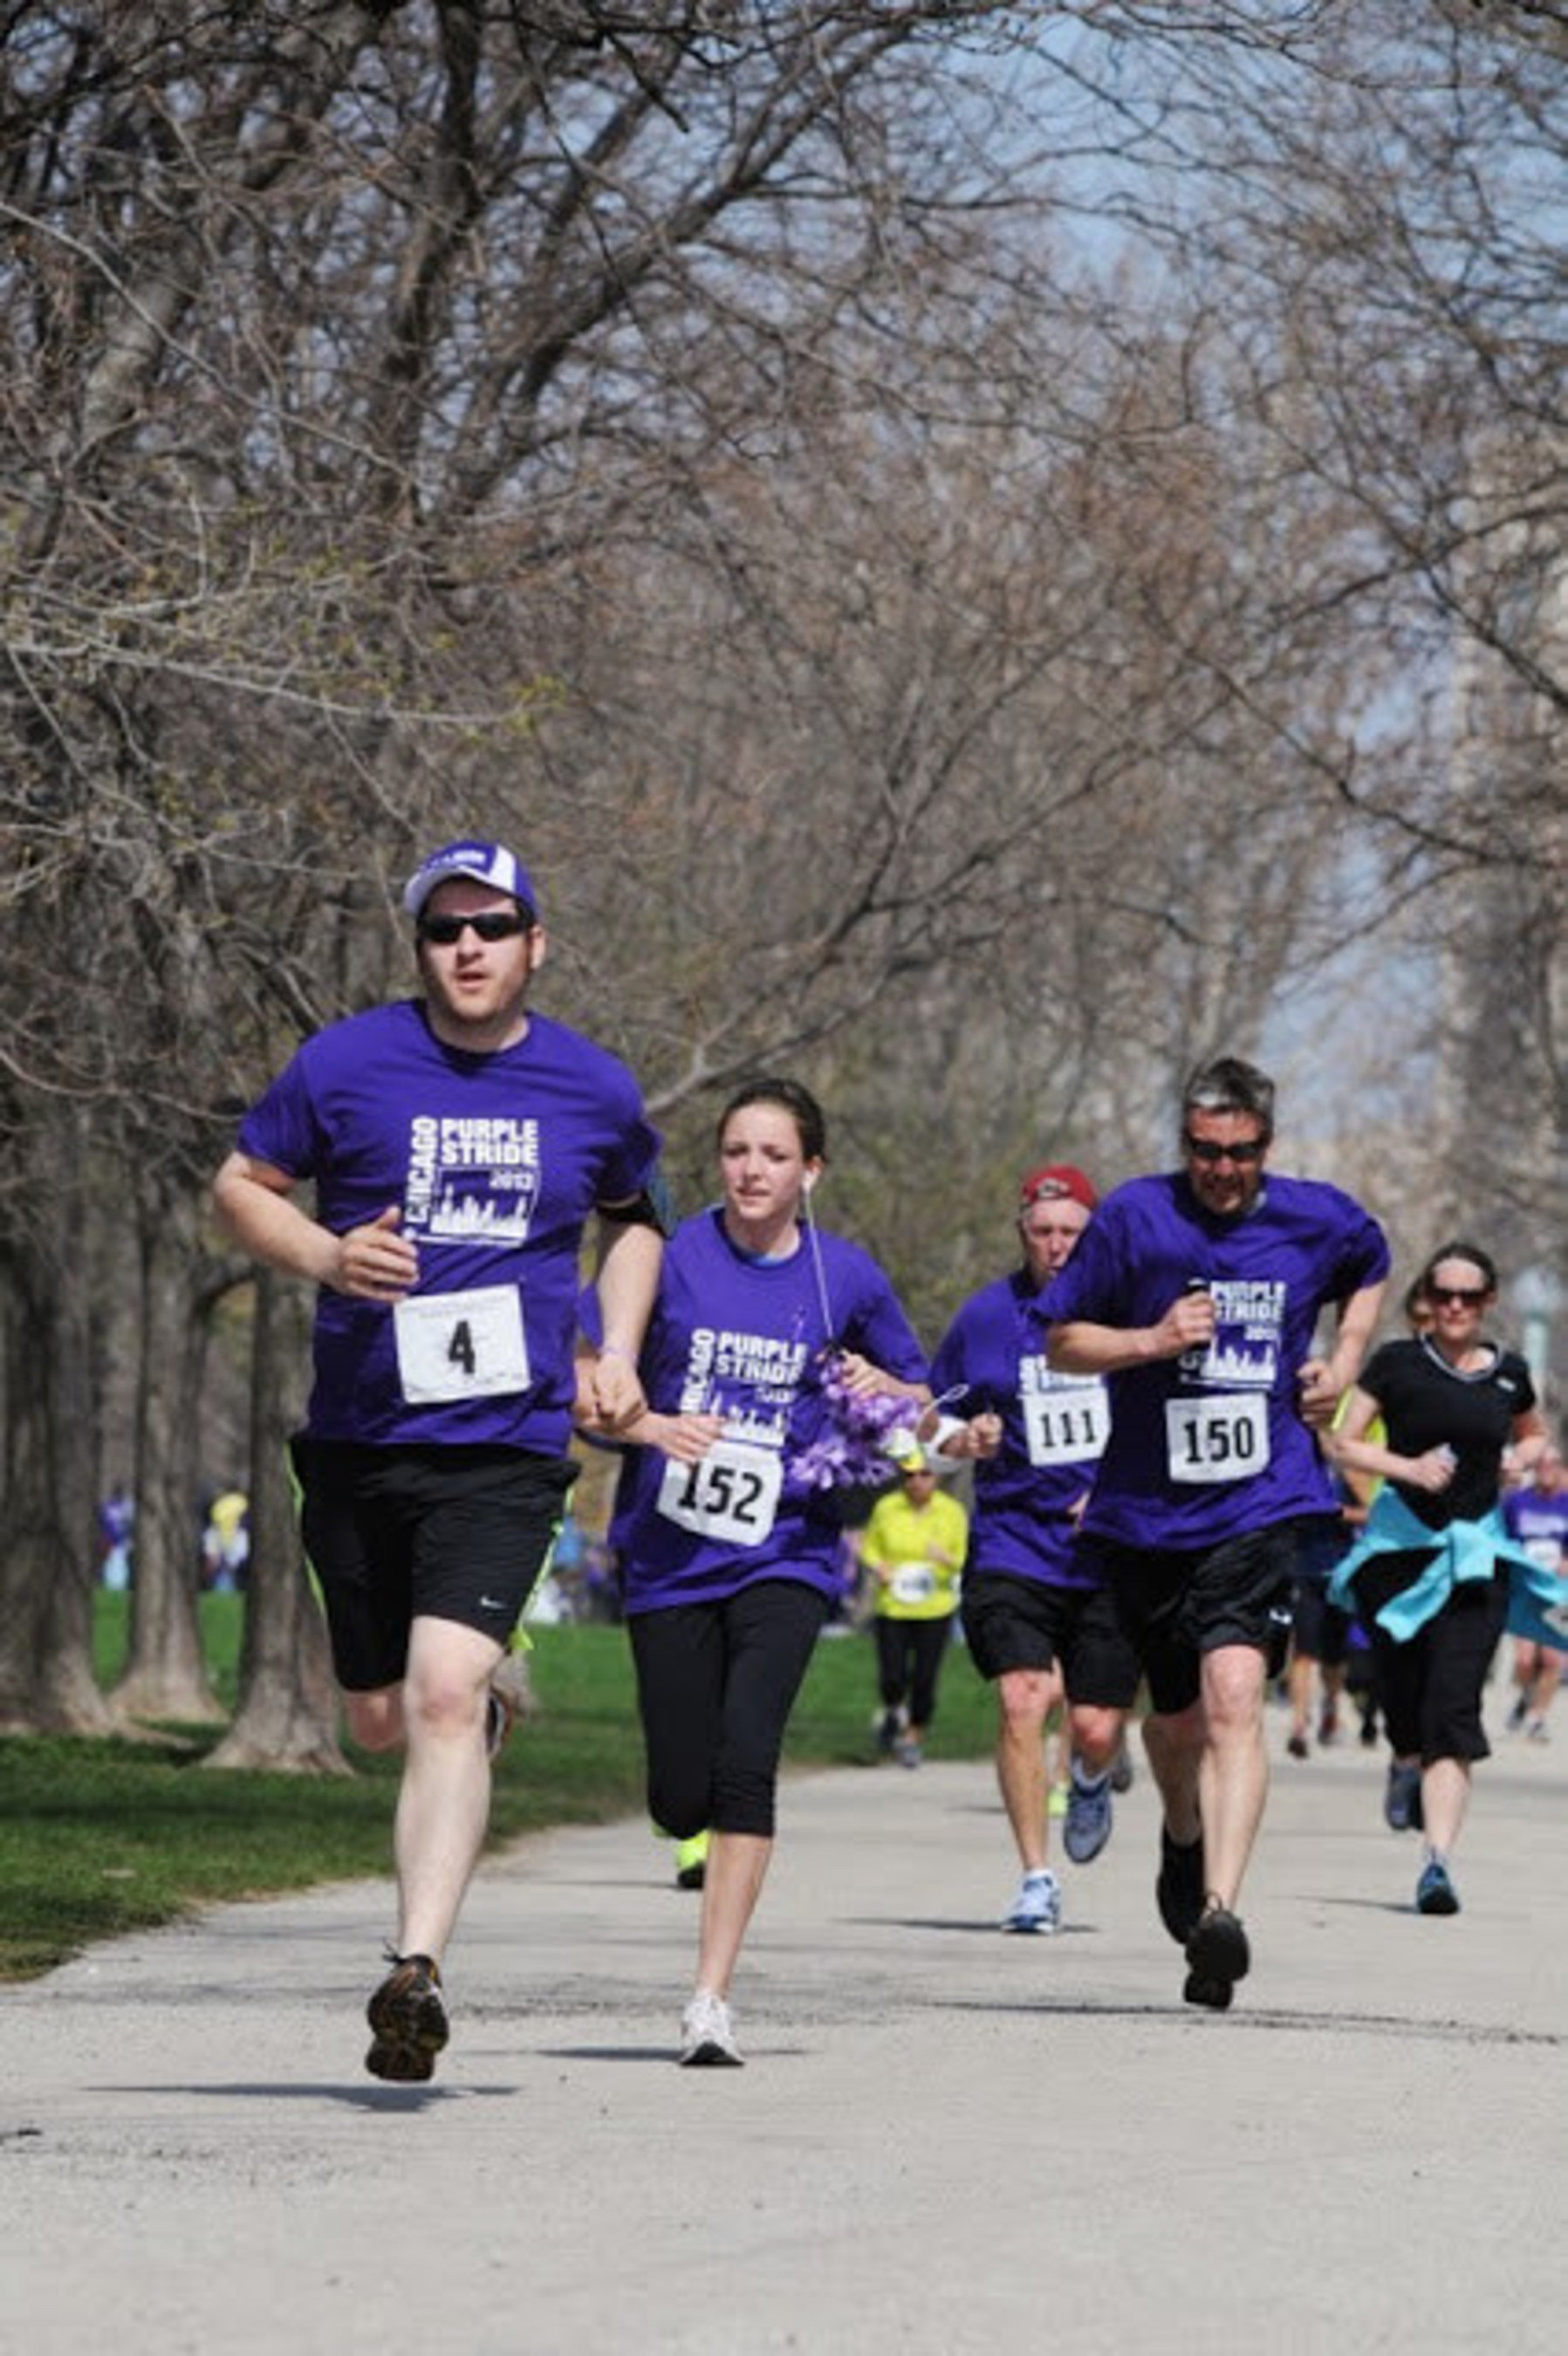 Past PurpleStride Chicago runners participating in the 5K run